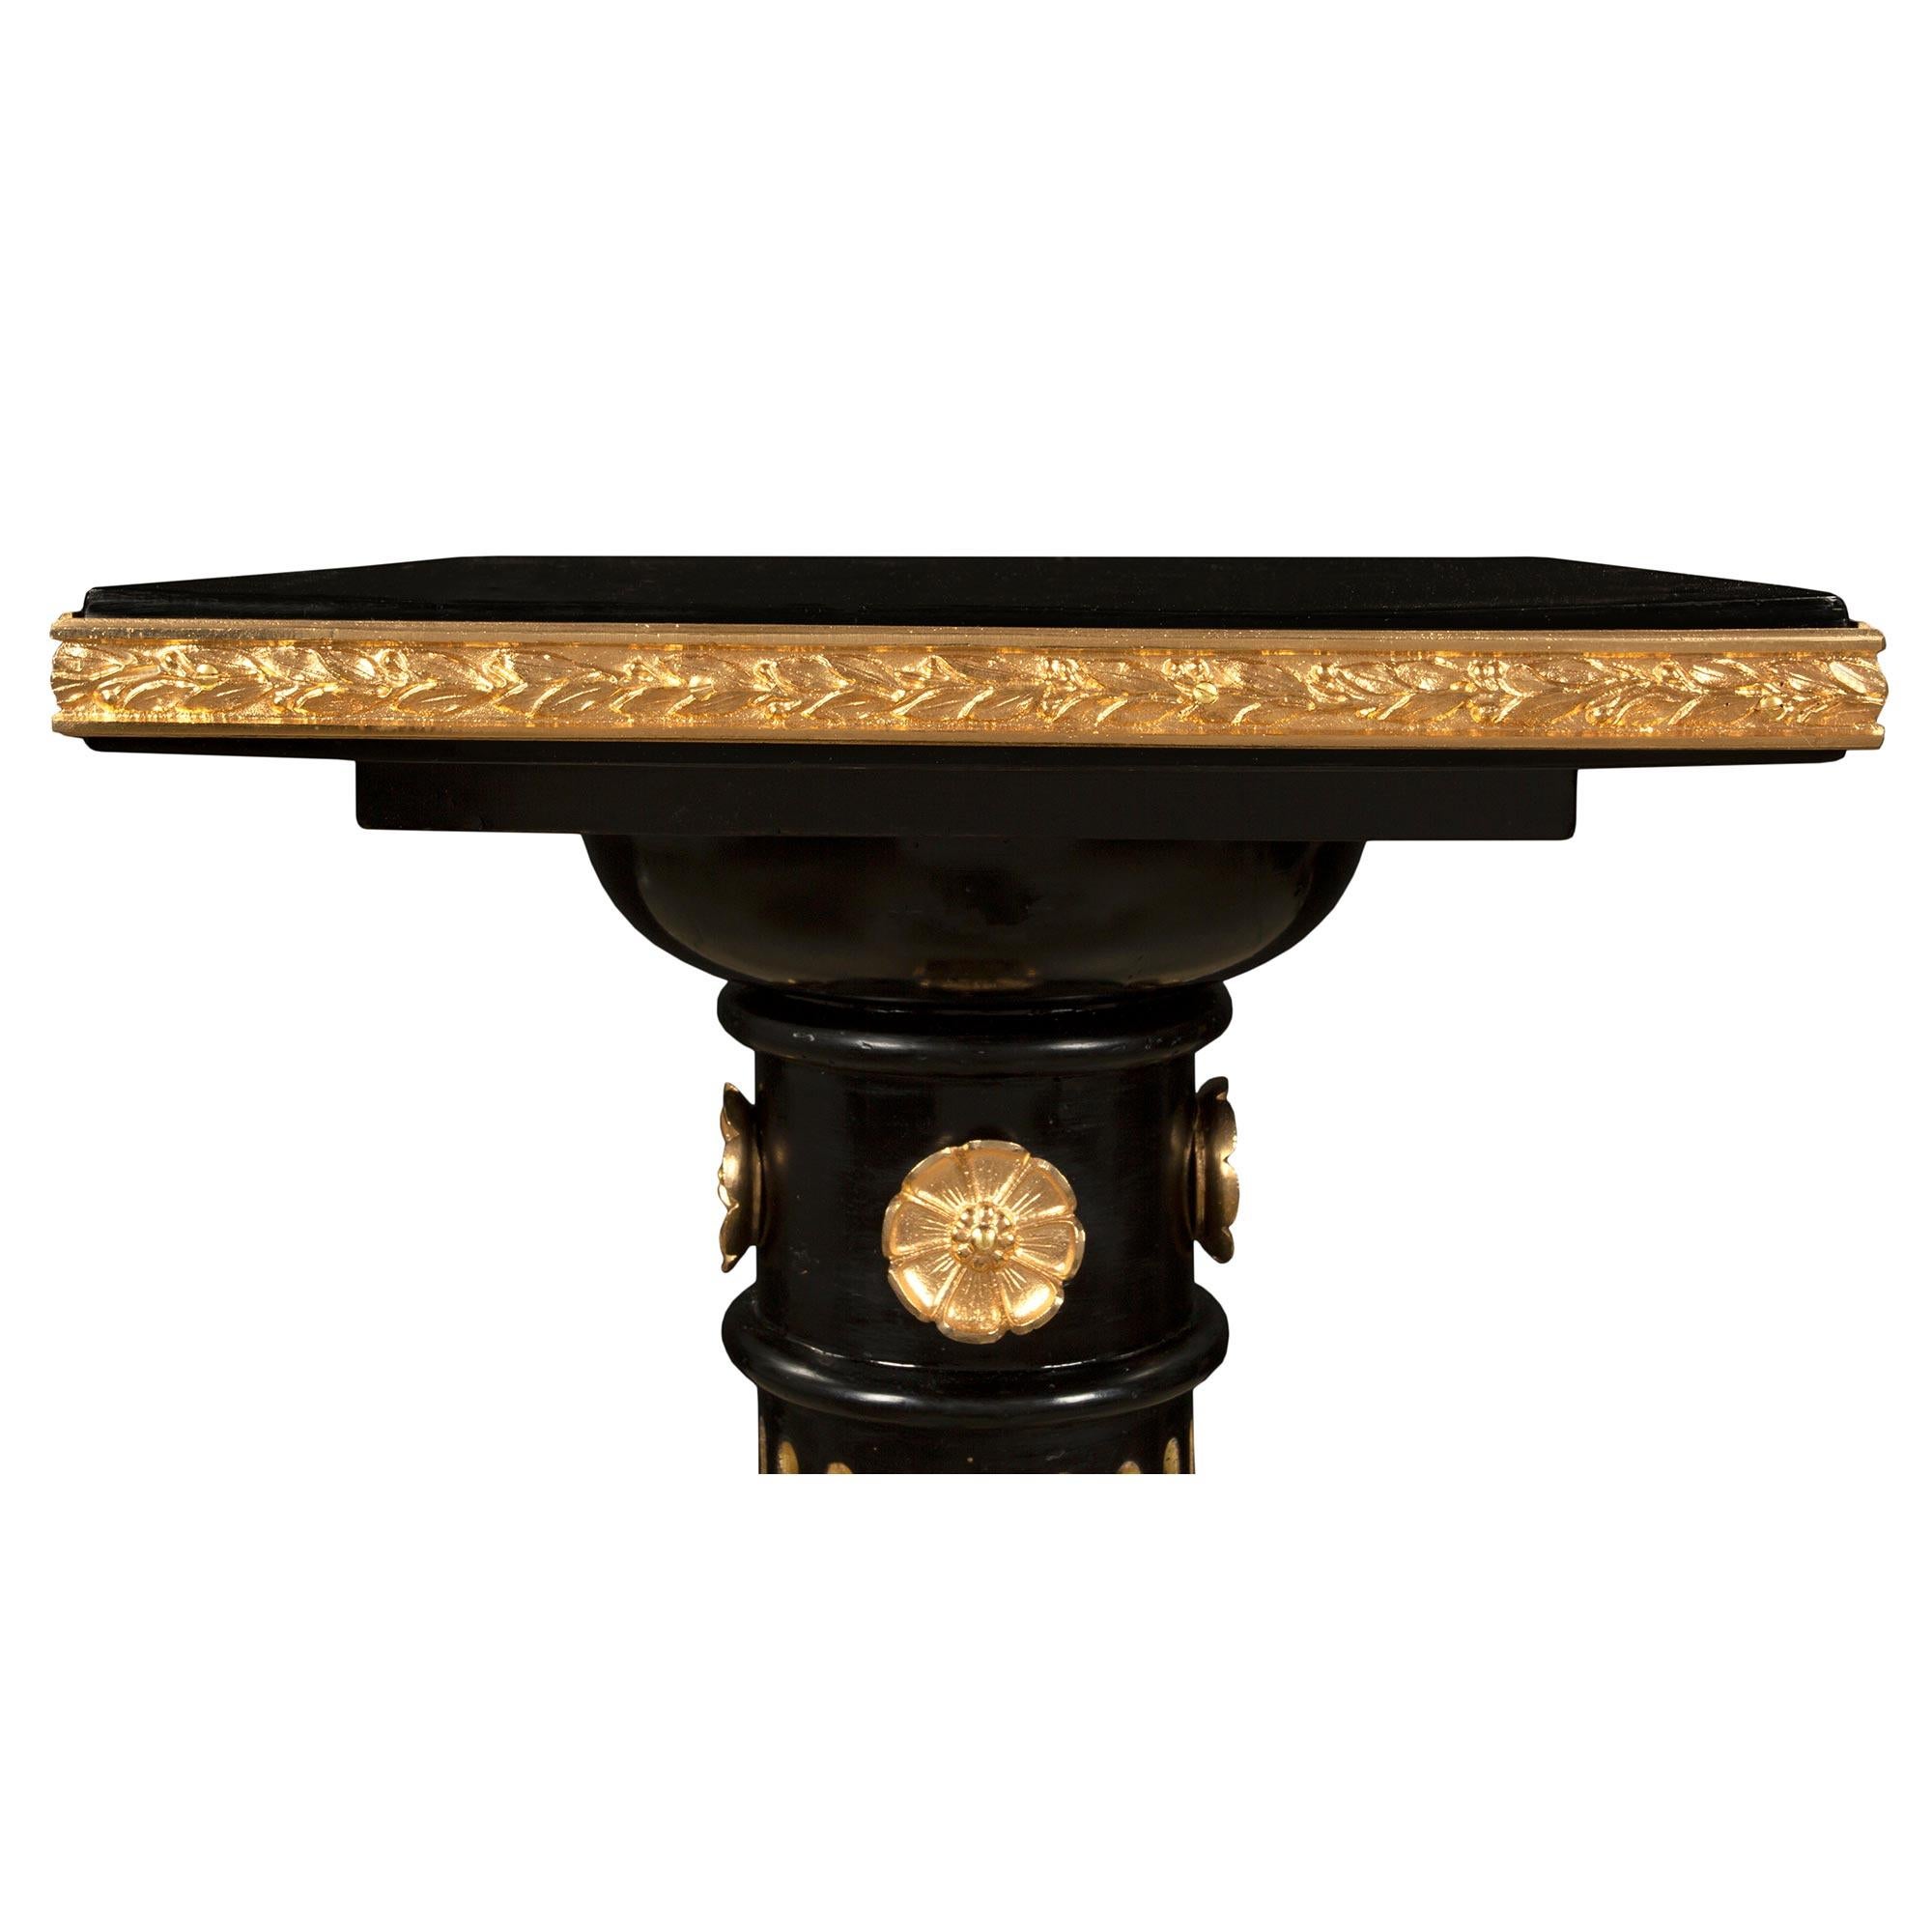 Ormolu French Mid-19th Century Louis XVI Style Mounted Pedestal For Sale